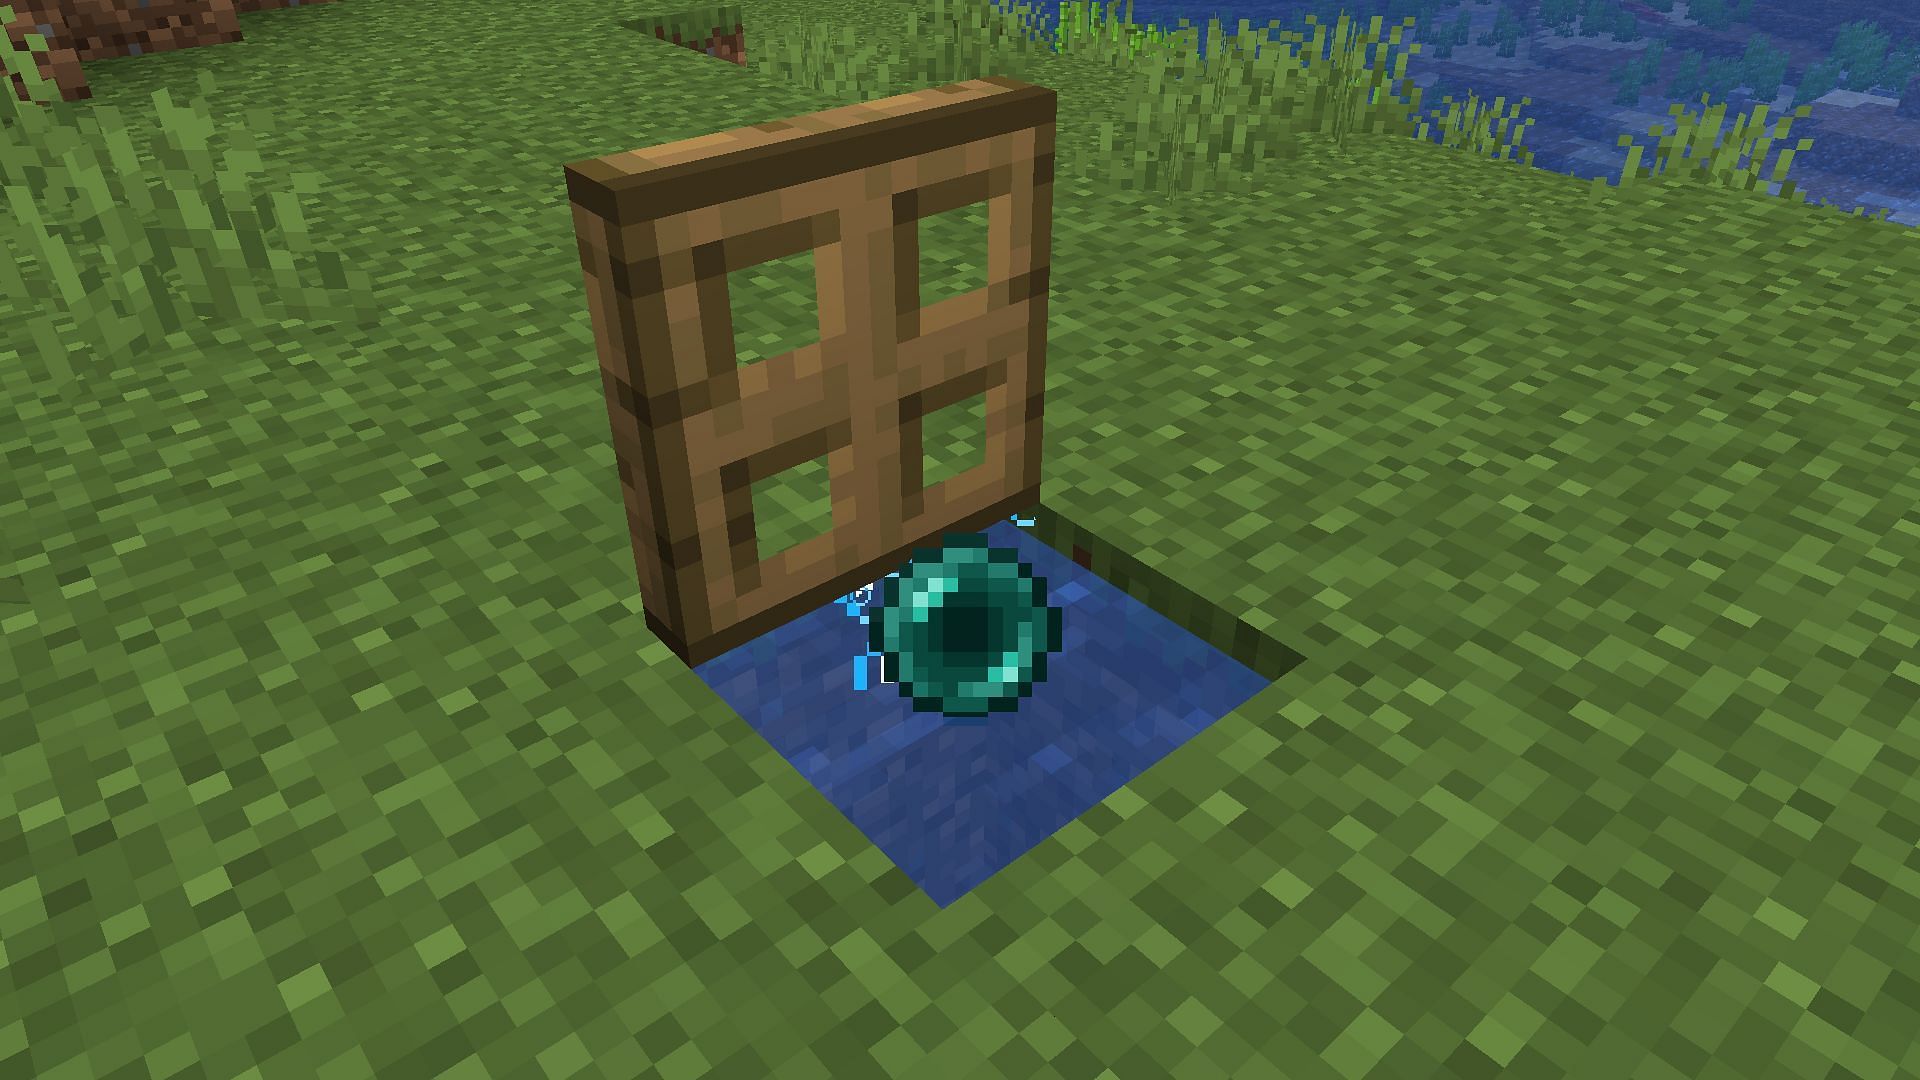 A stasis chamber in Minecraft (Image via Minecraft)